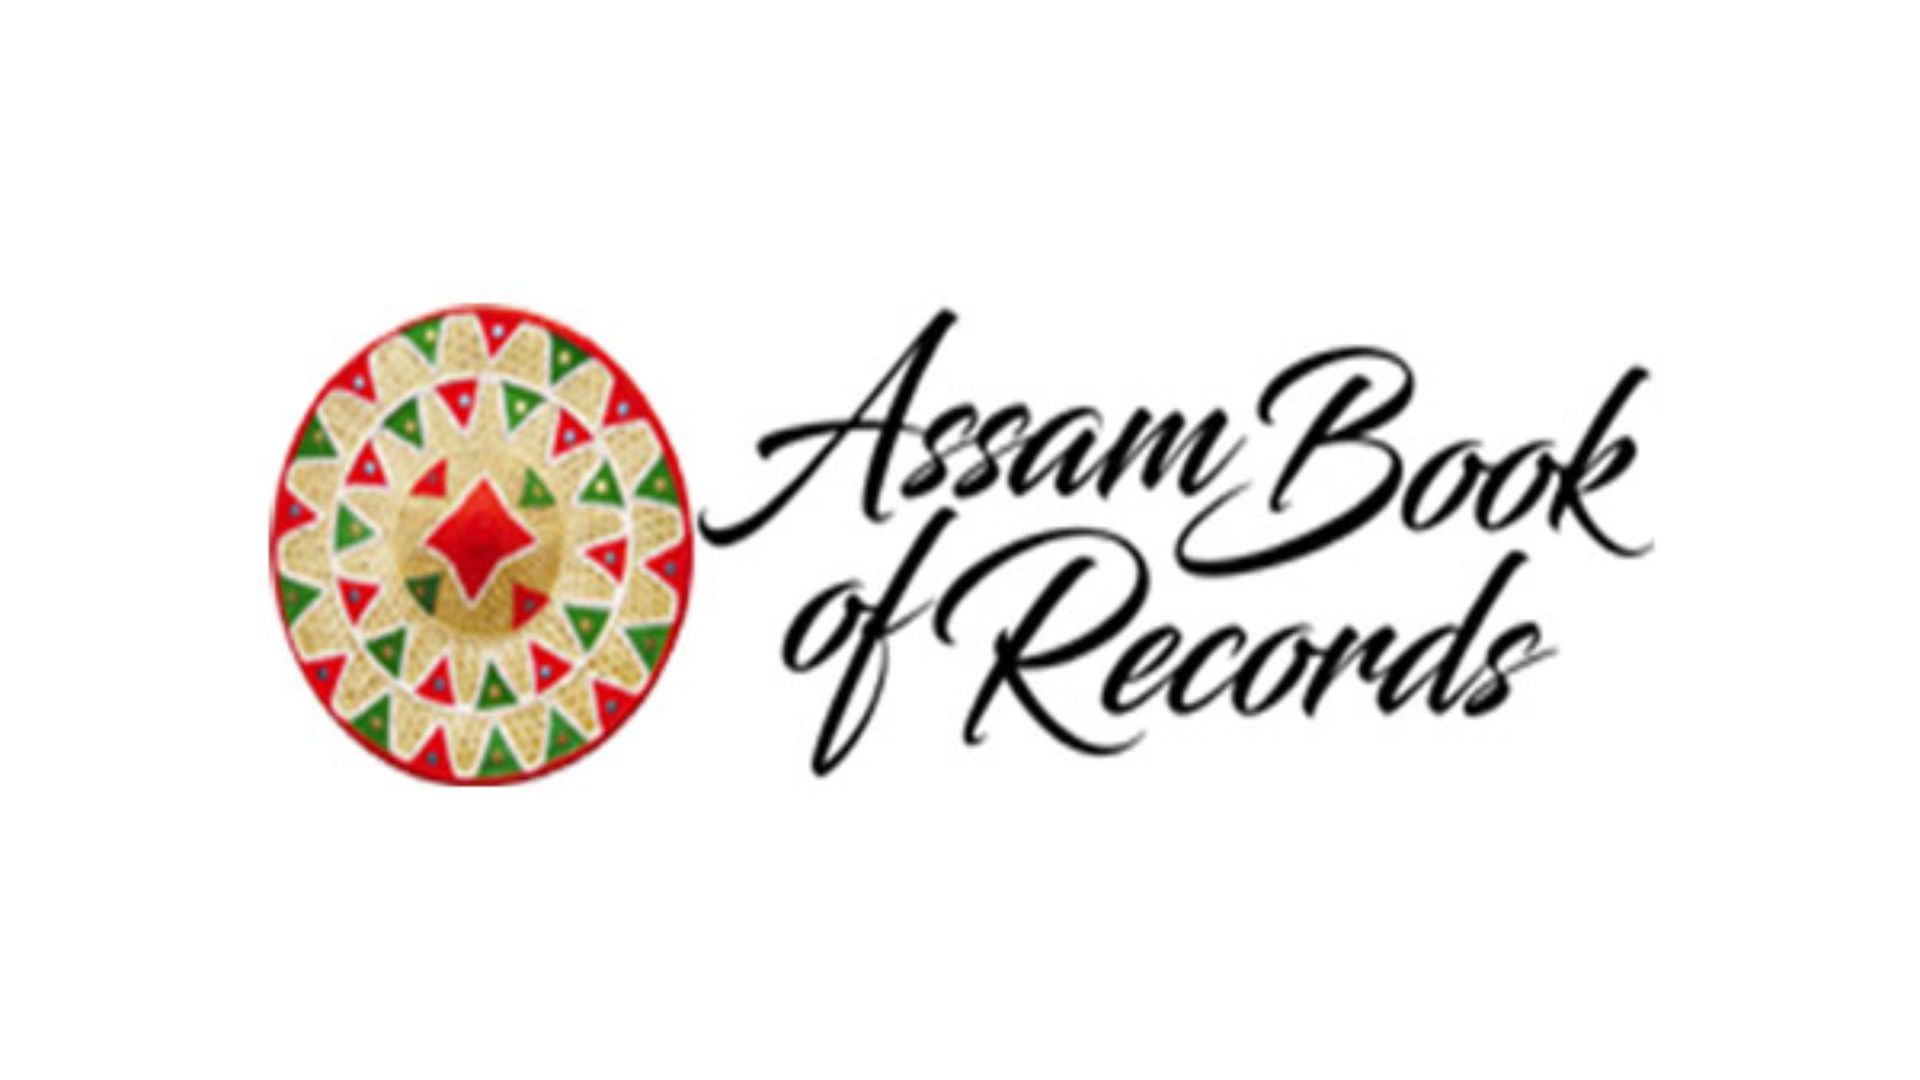 Deaf and mute peoples sets record by performing state anthem in Assam